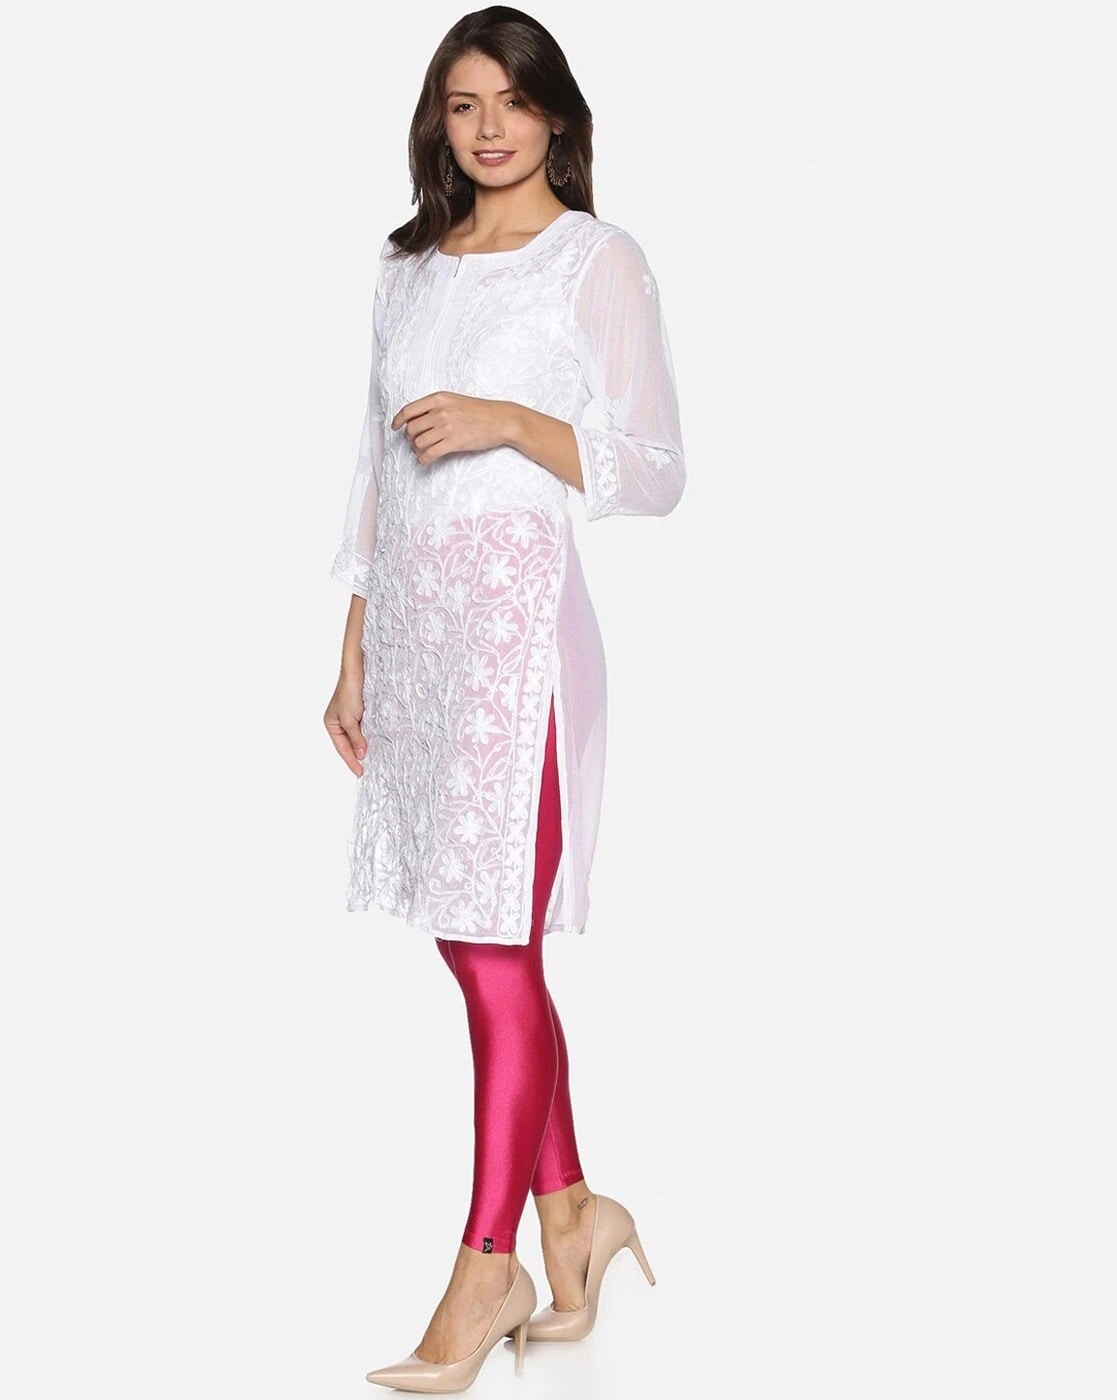 Twin Birds Mystic Pink Girls Legging - Get Best Price from Manufacturers &  Suppliers in India